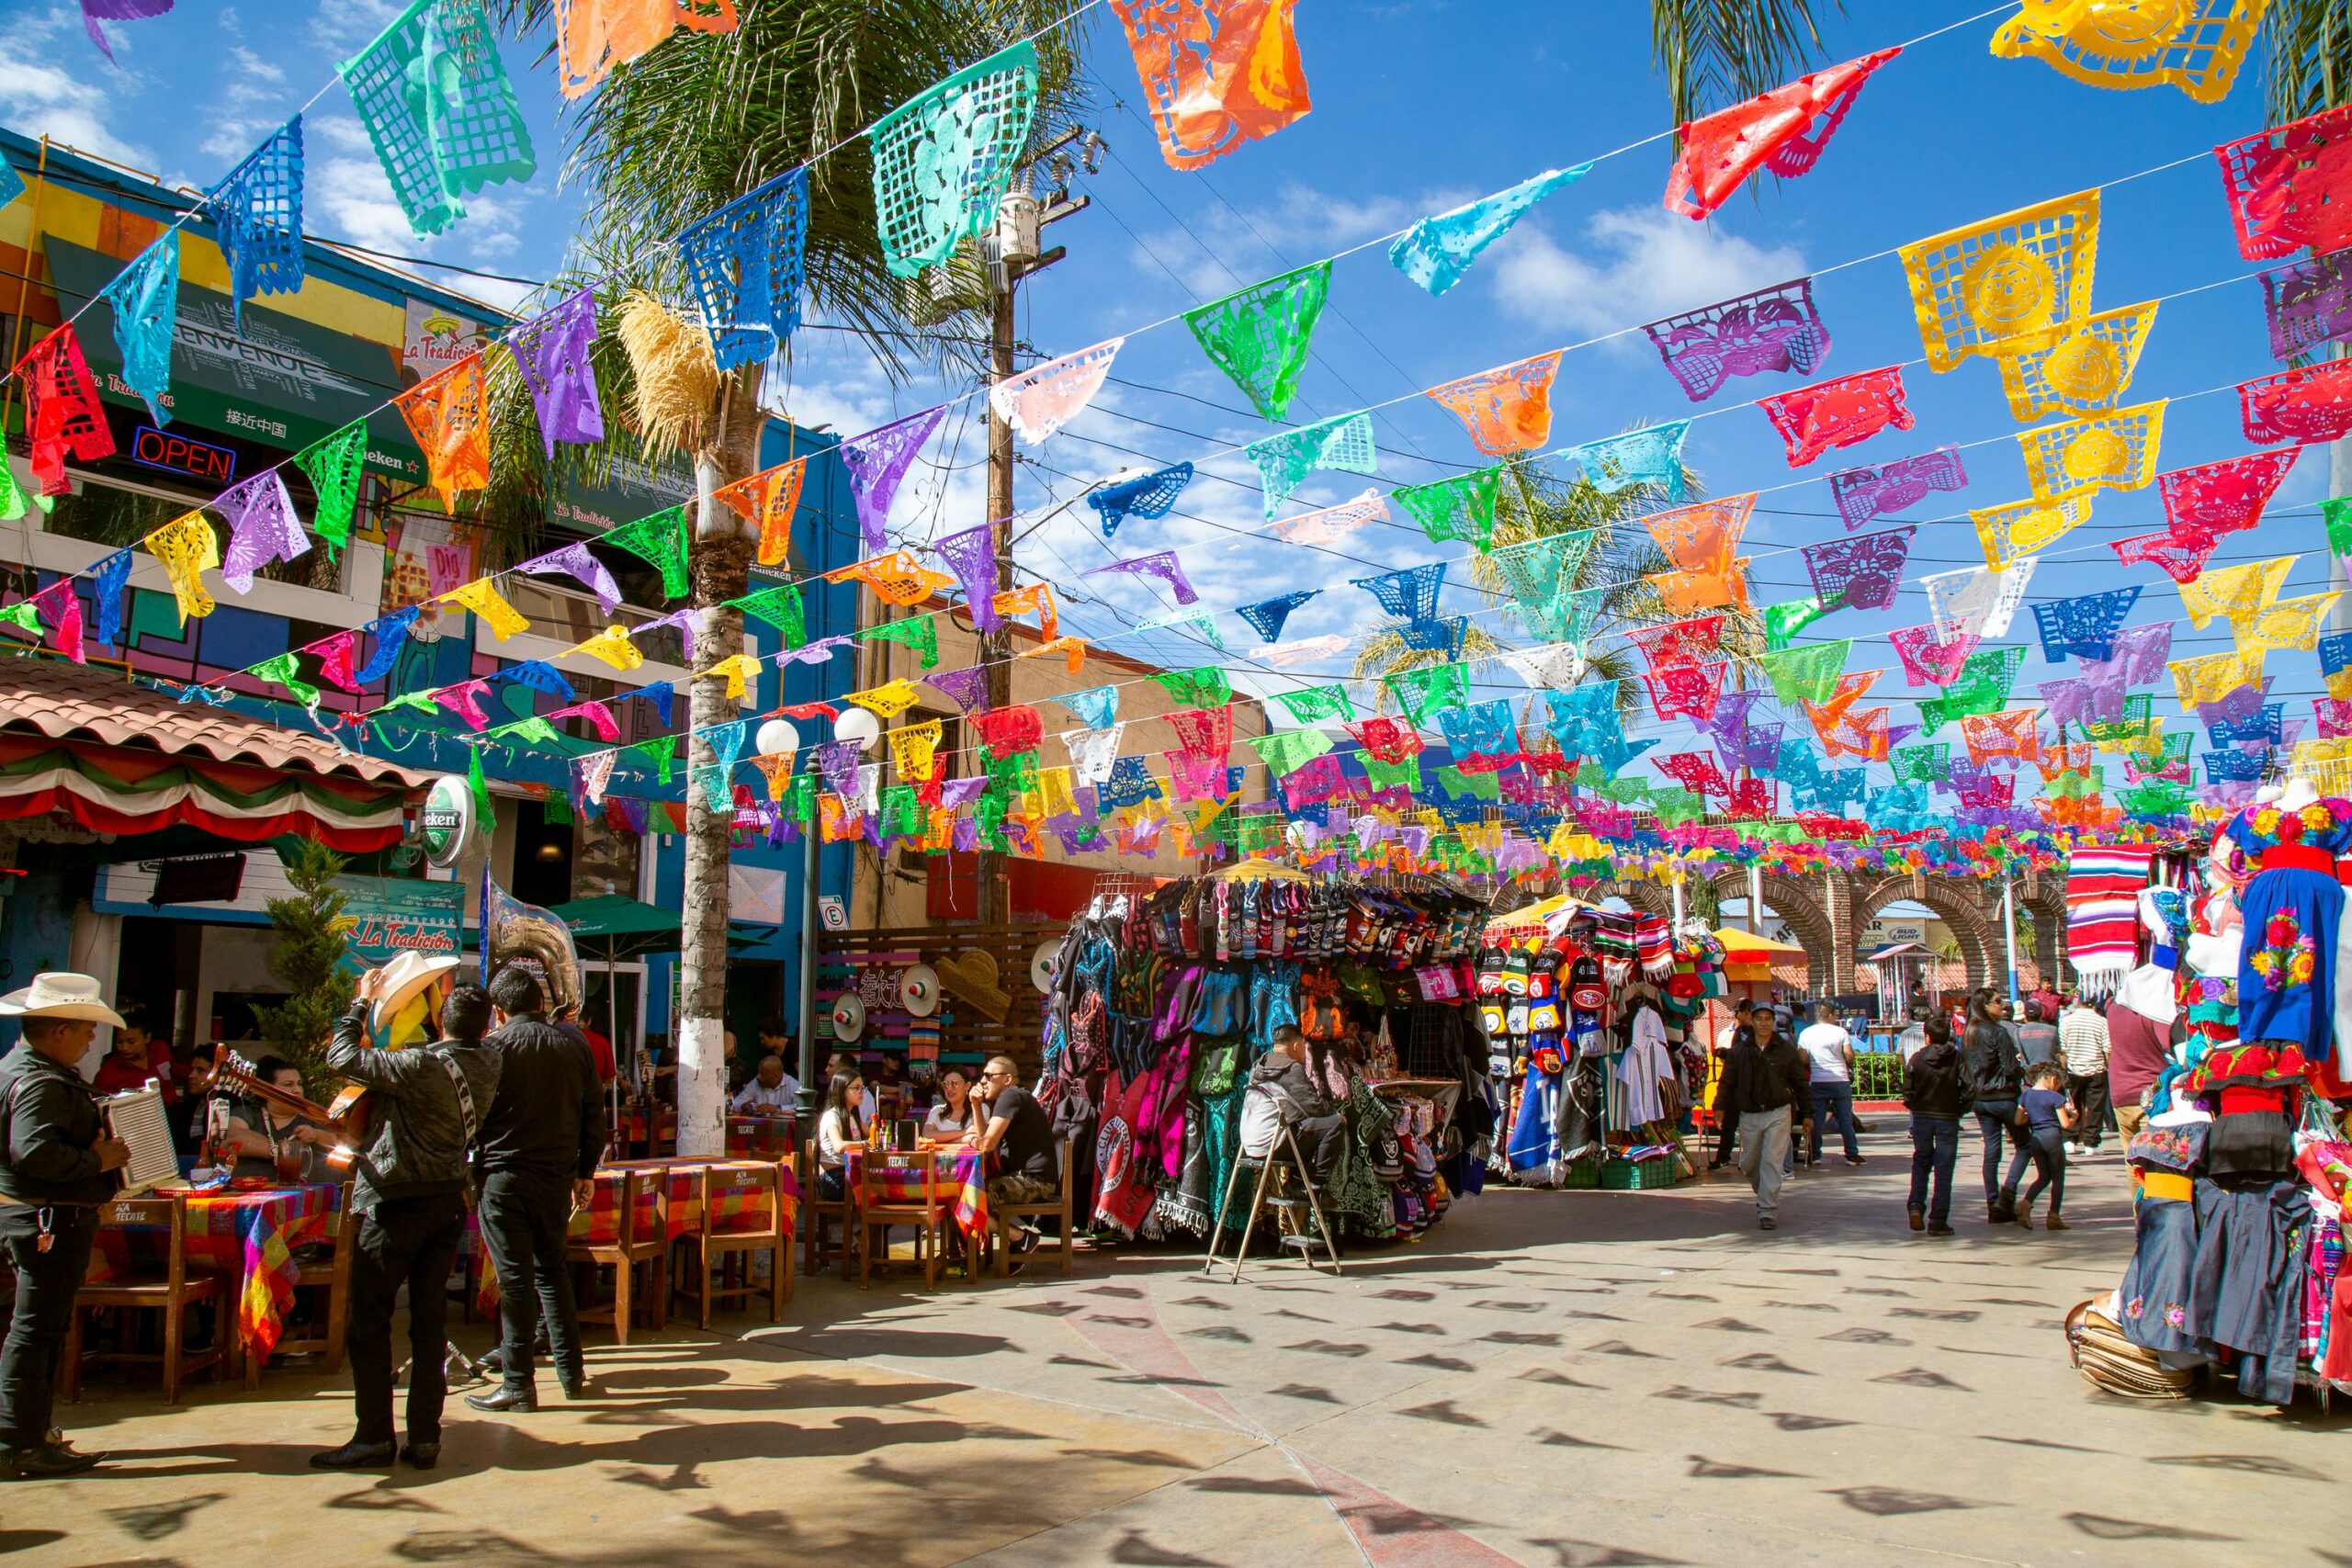 Top 10 Things to Do on Your Next Trip to Tijuana, Mexico